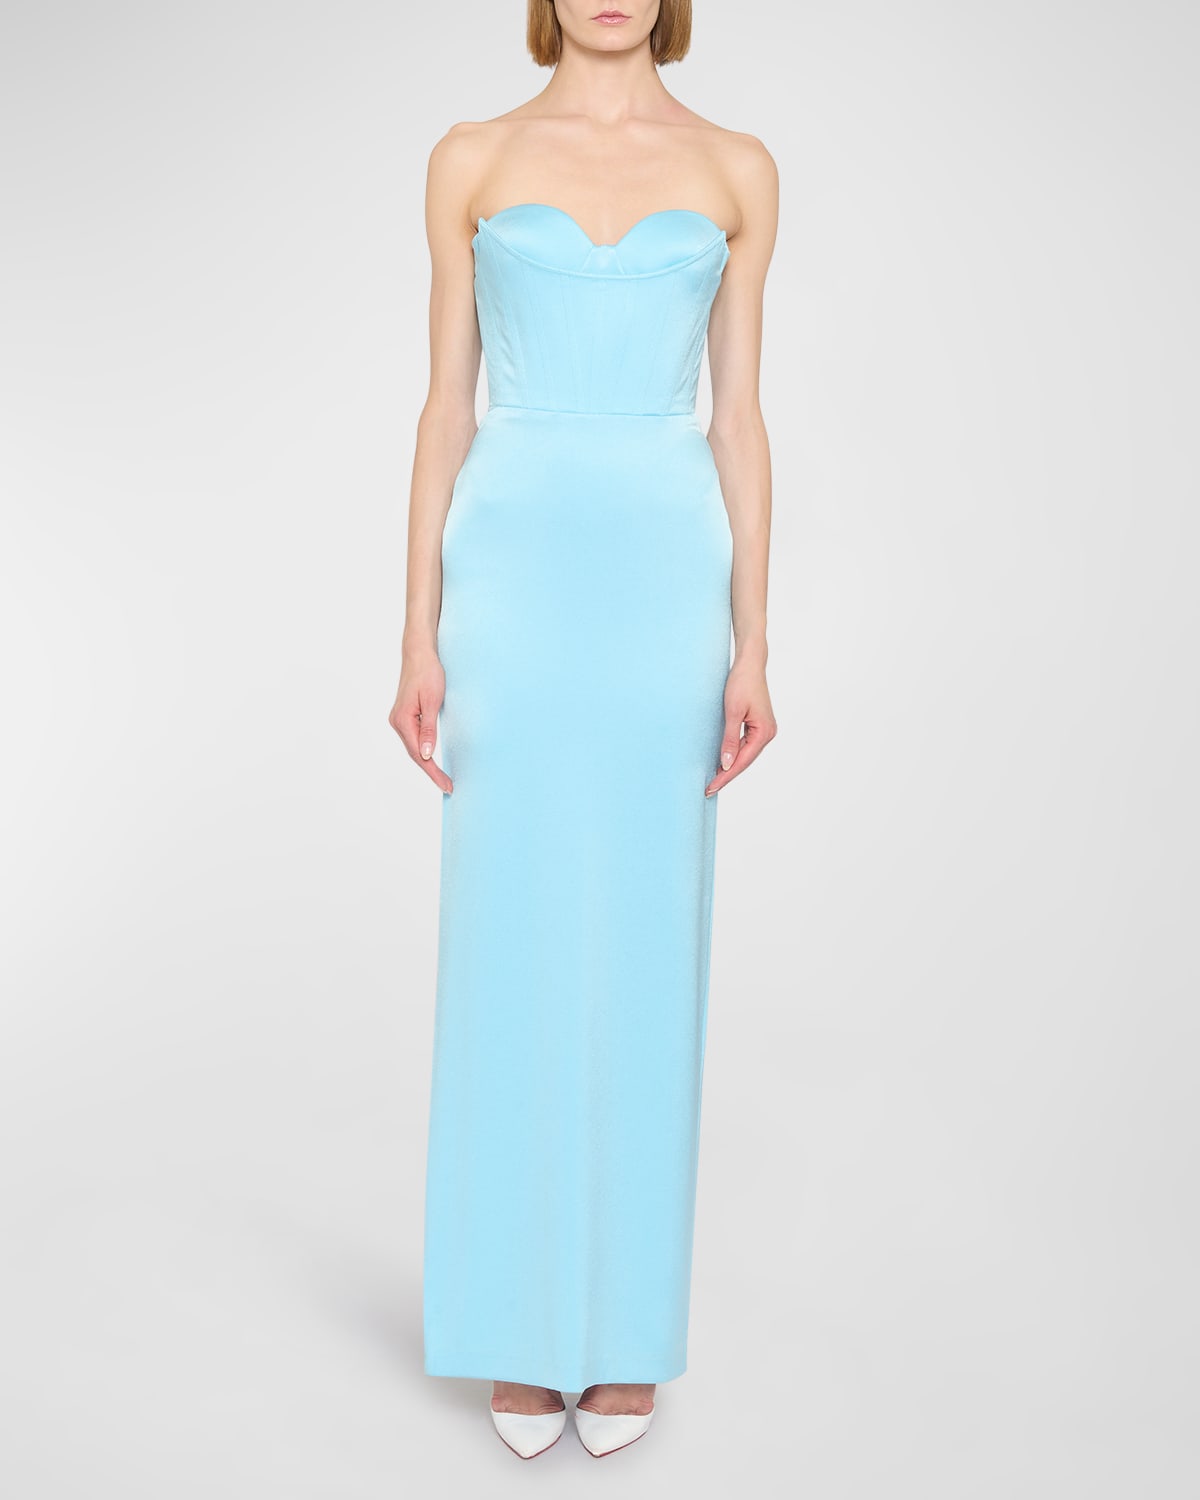 ALEX PERRY HONORE CORSET GOWN